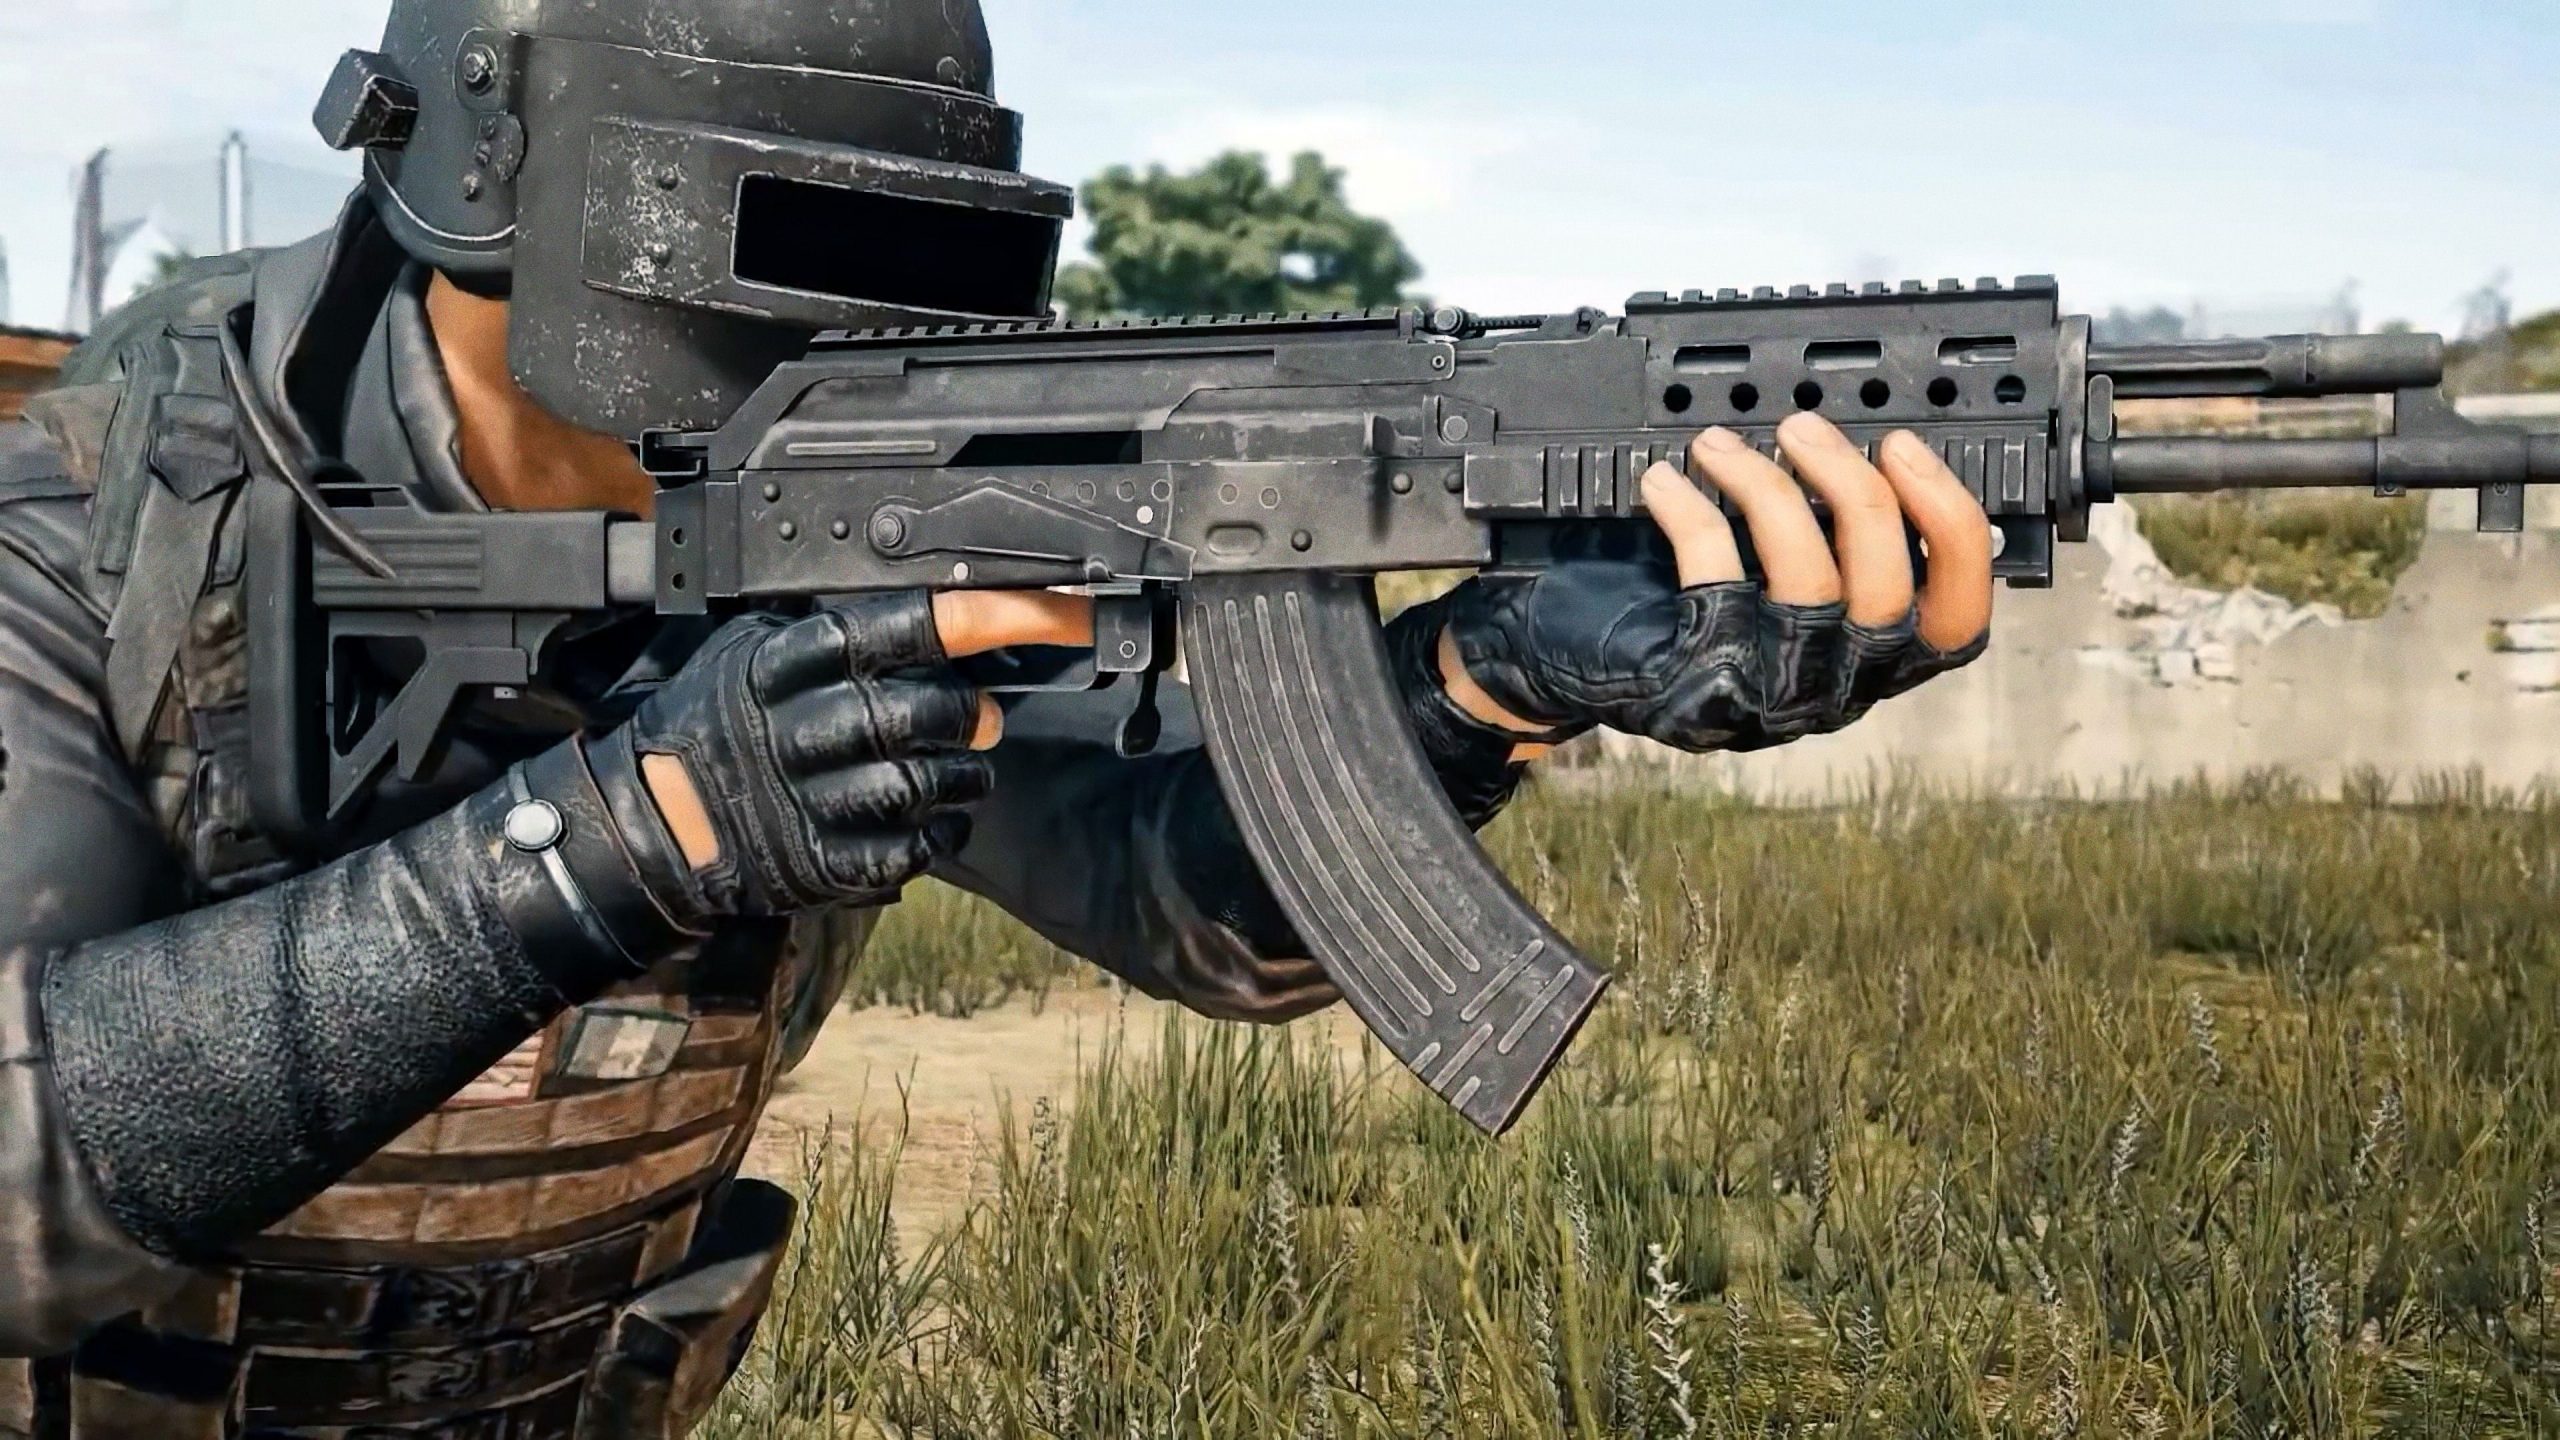 Pubg mobile weapons that considered op must be nerfed